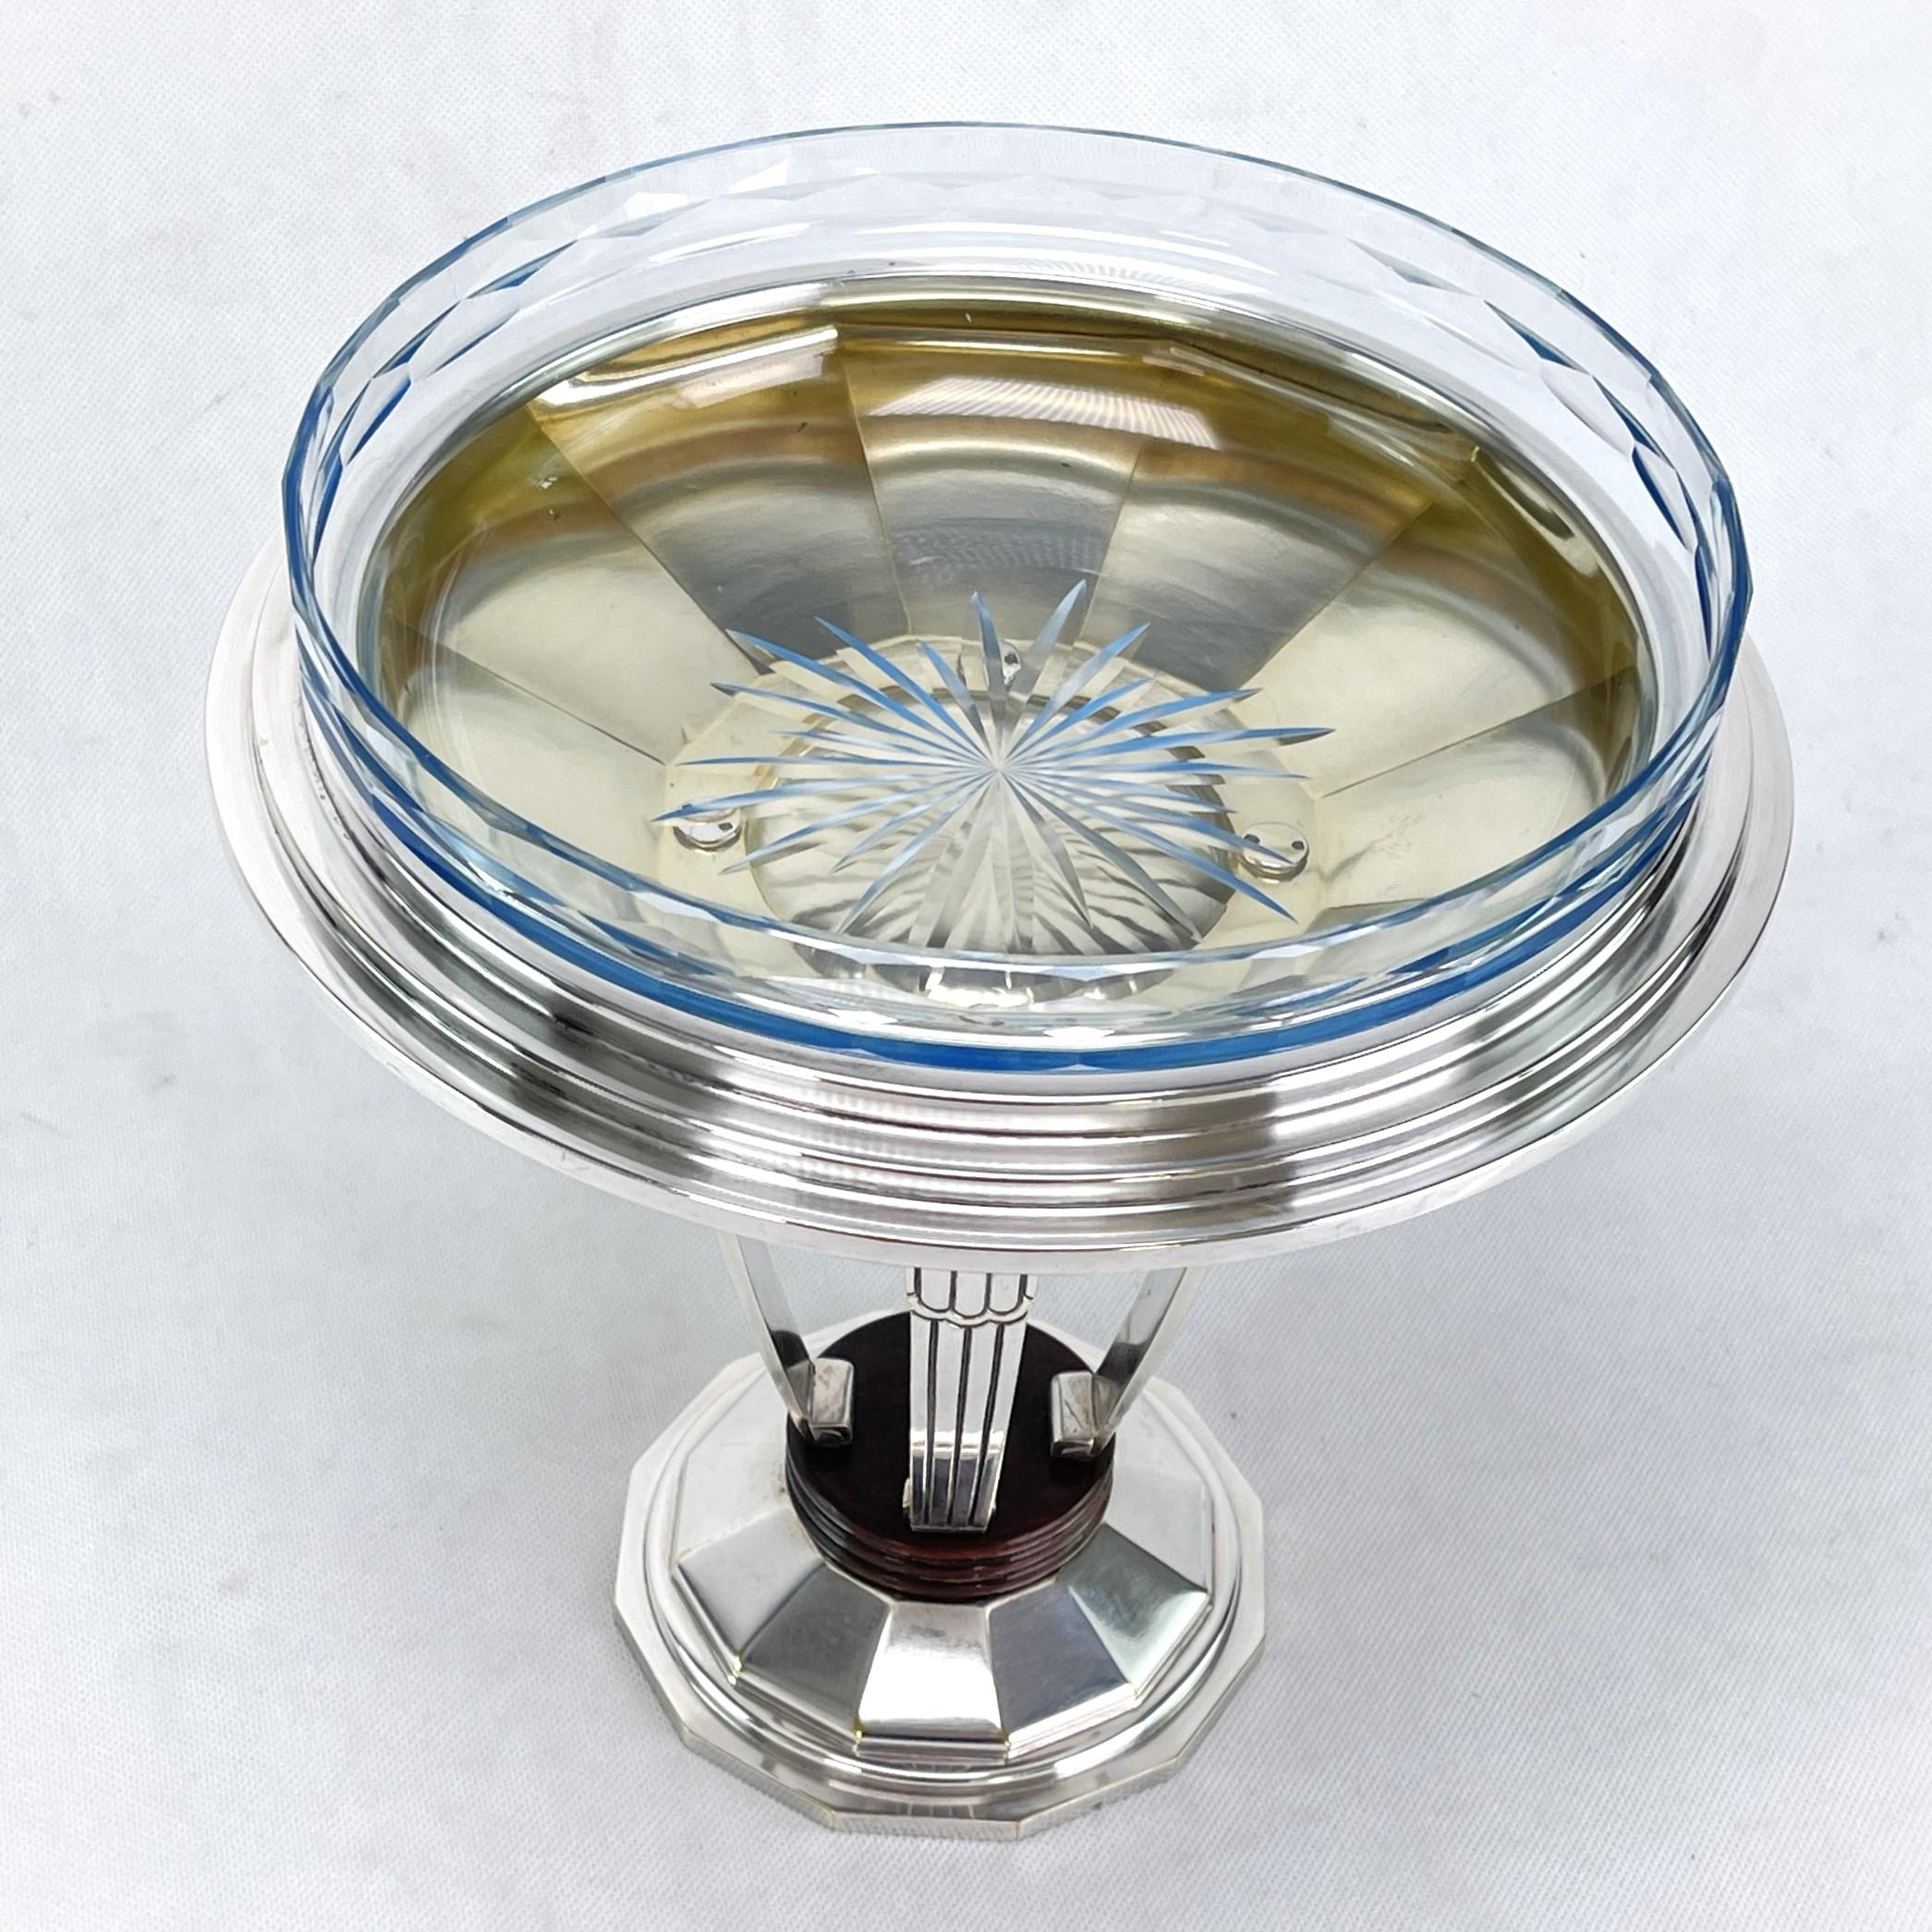 Mid-20th Century Beautiful ART DECO centrepiece bowl by Durousseau & Raynaud silver plated 1930s For Sale